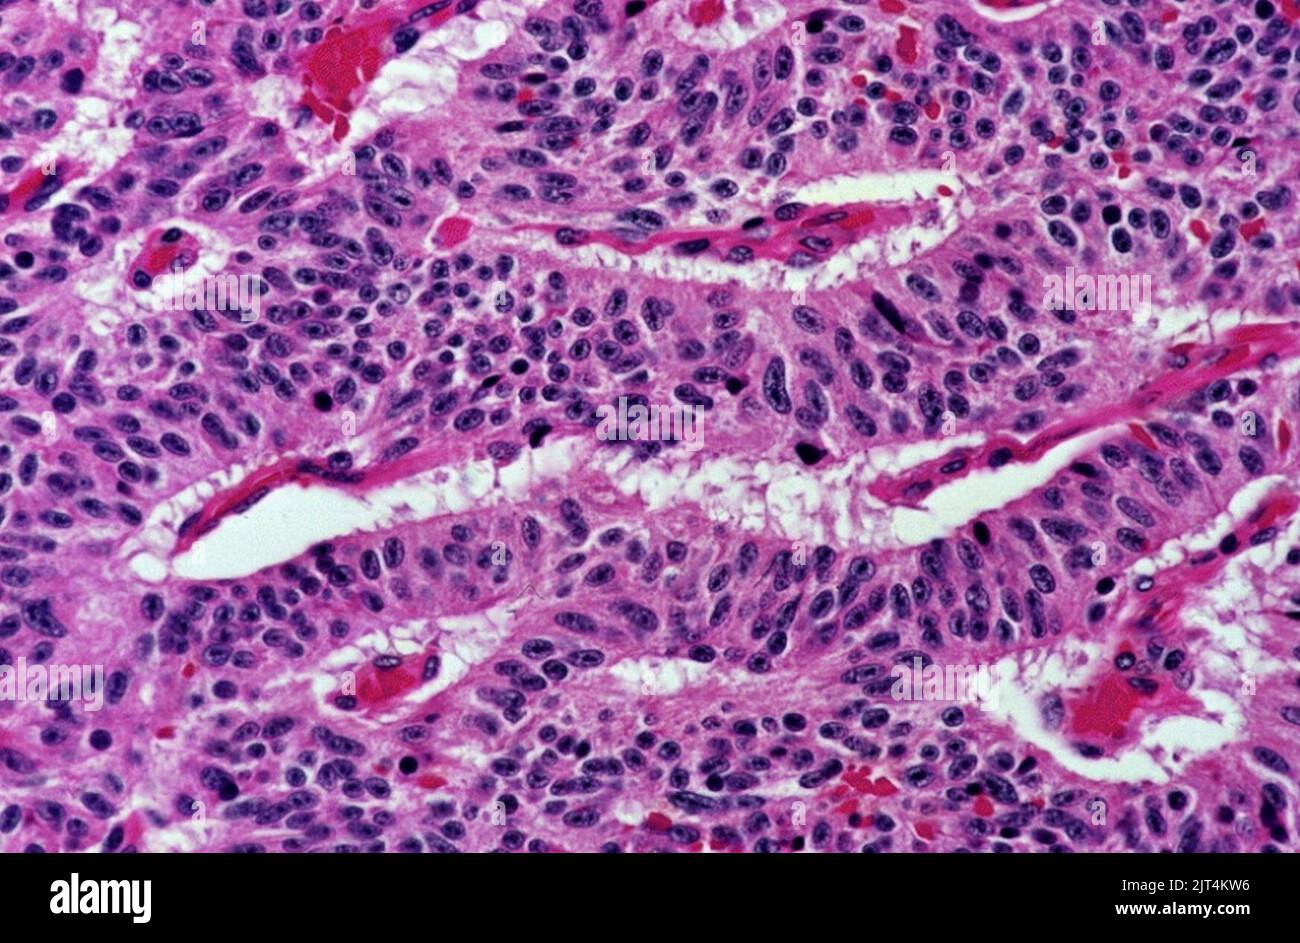 Typical carcinoid tumor of the lung, trabecular pattern. Stock Photo